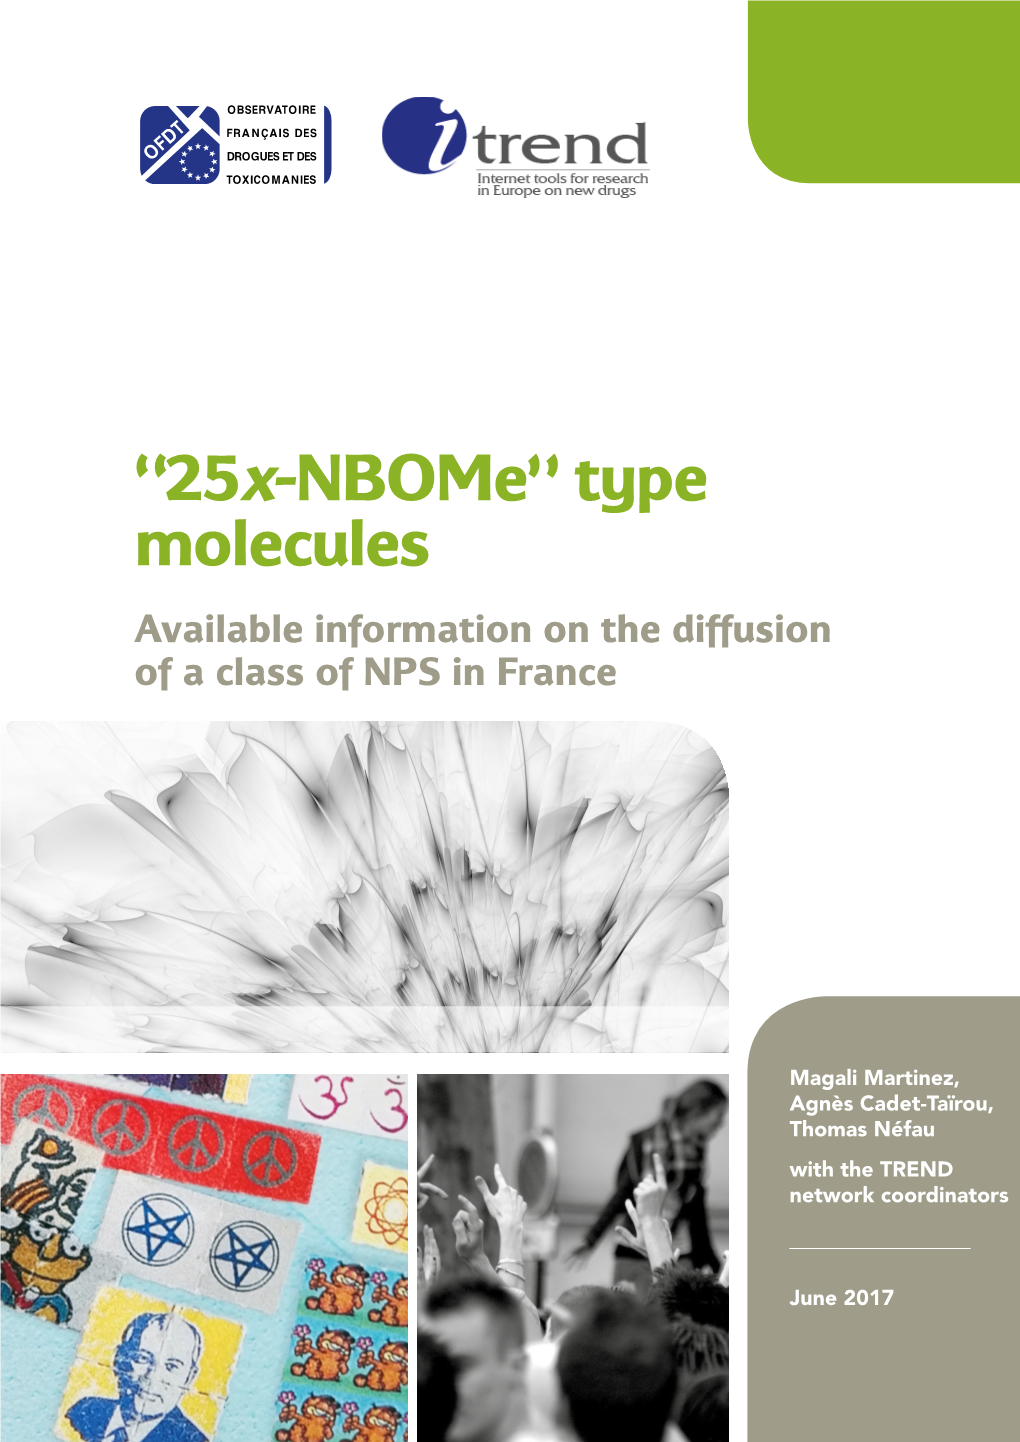 25X-Nbome” Type Molecules Available Information on the Diffusion of a Class of NPS in France